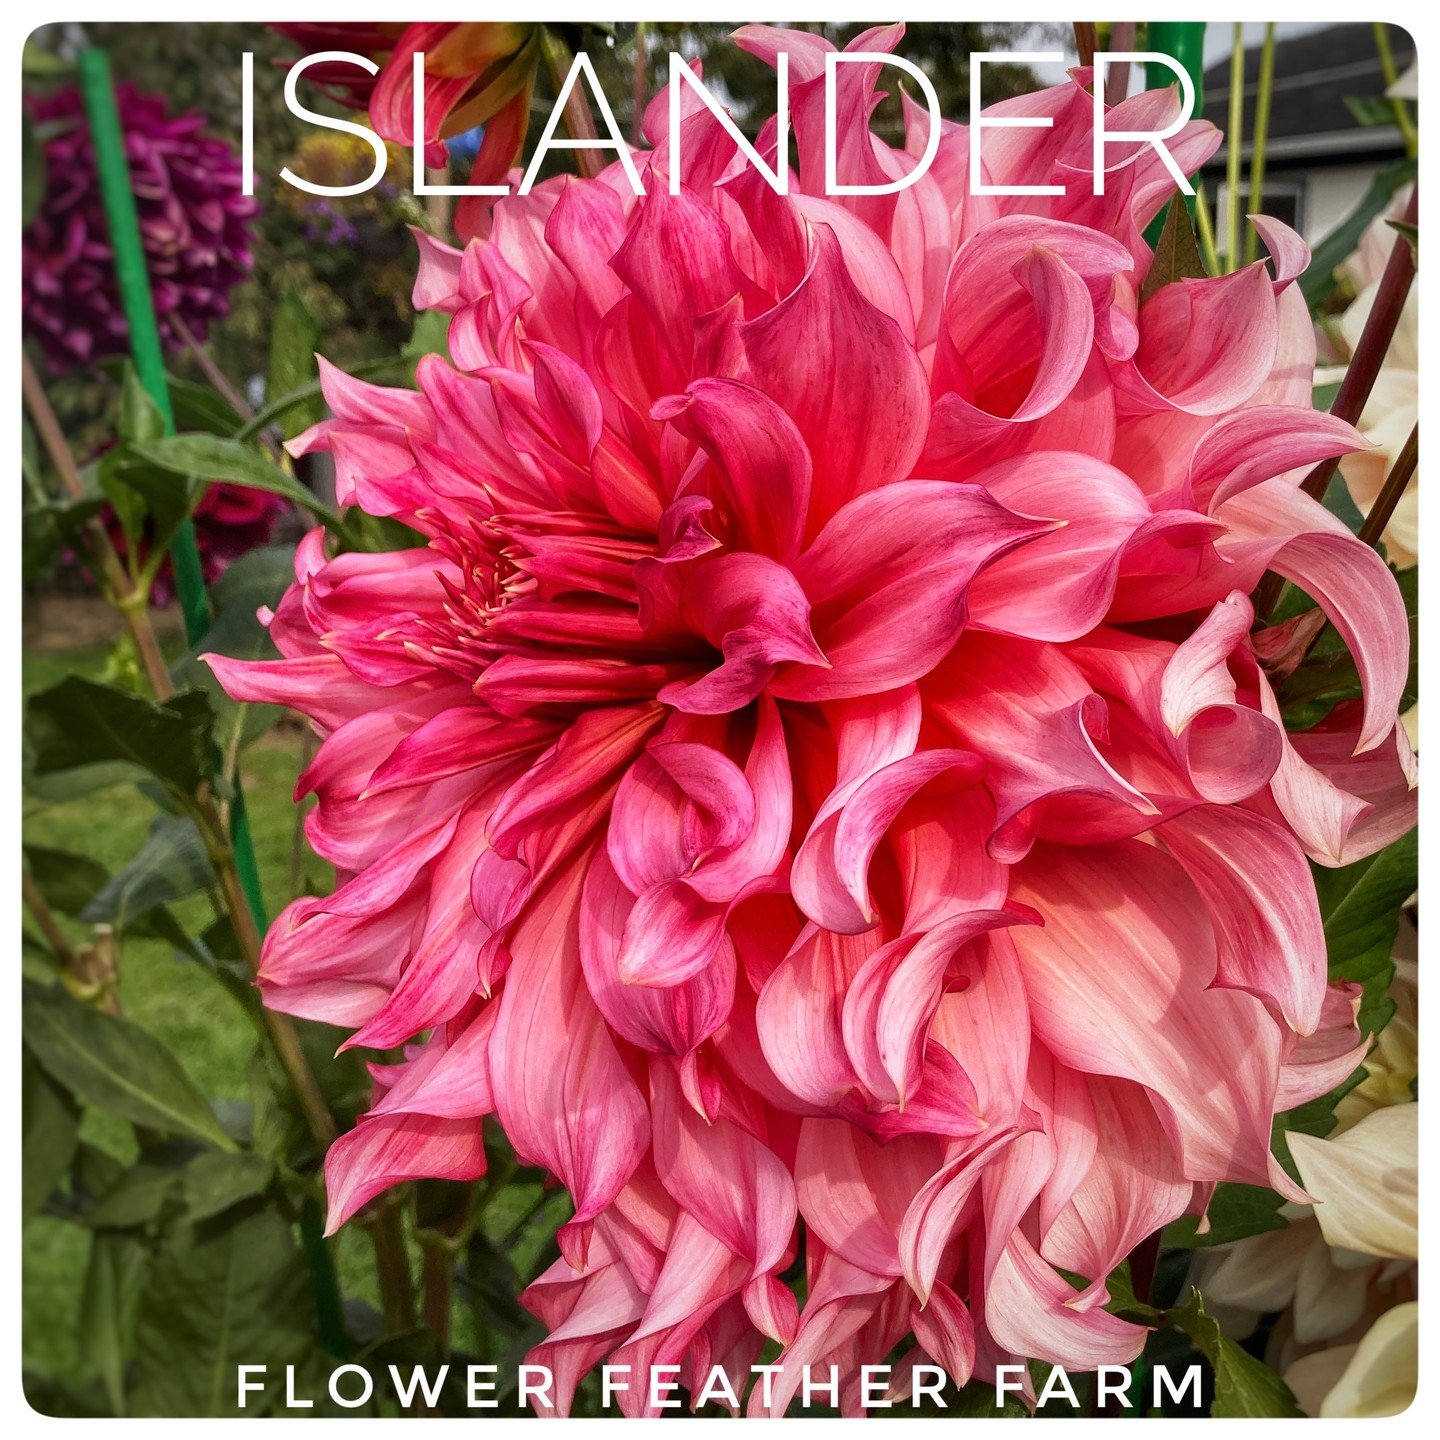 Islander will have you dreaming of a tropical island with its generous and vibrant hues and twisty petals streaked with cream.

Bloom Size: 8-10 inches; Height: 4-5 feet; Type: Decorative Dinner Plate

#dahlias